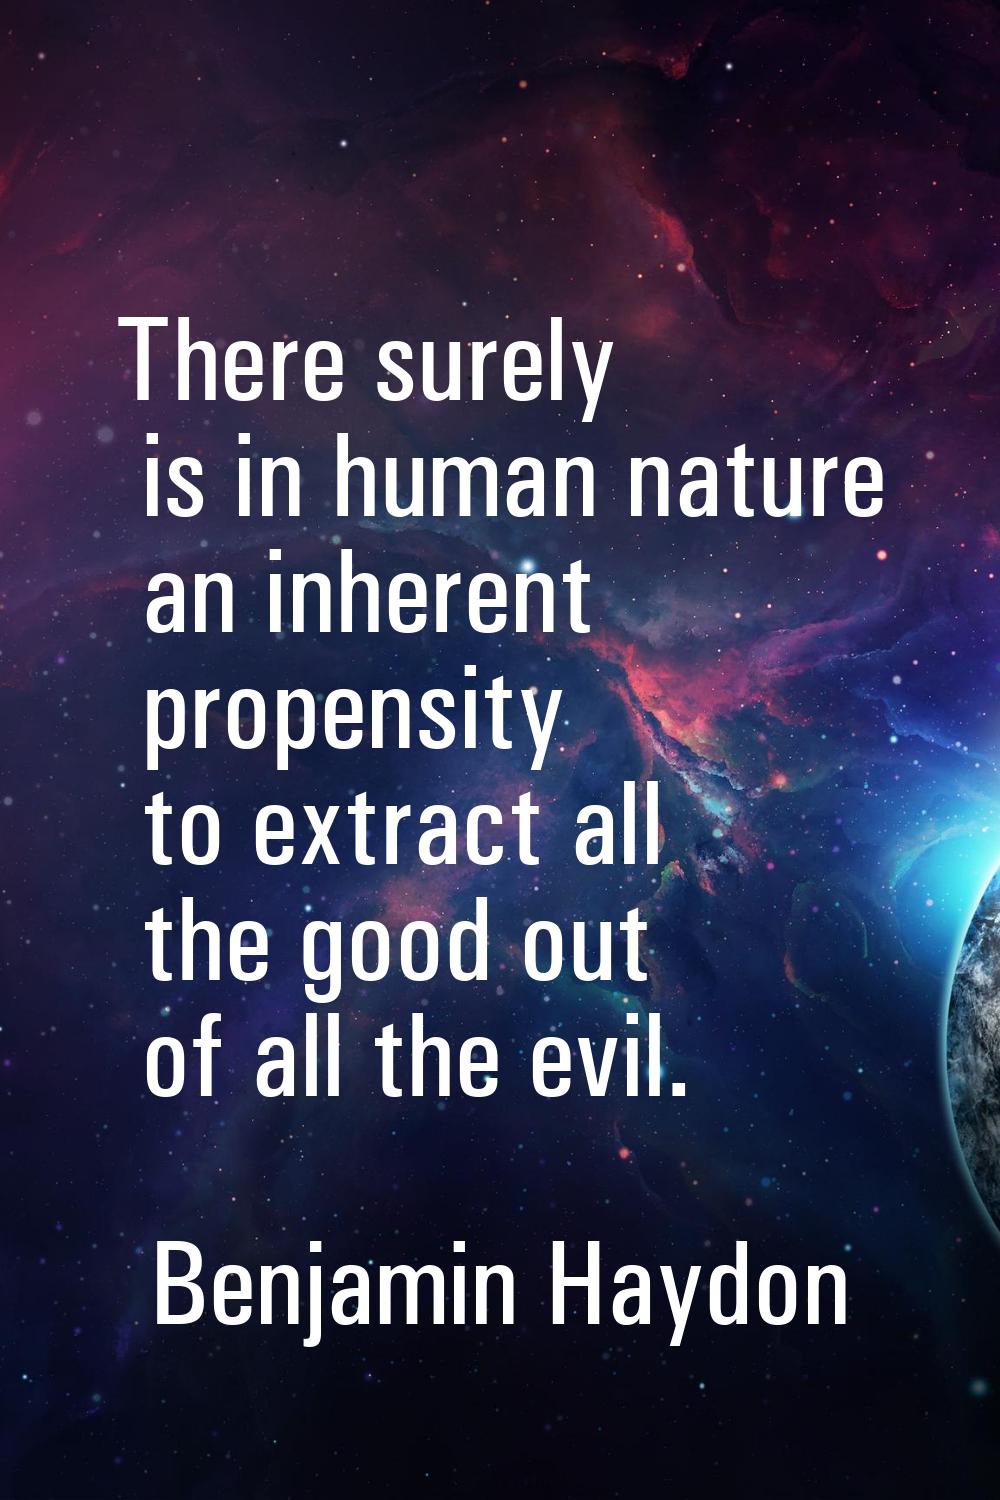 There surely is in human nature an inherent propensity to extract all the good out of all the evil.